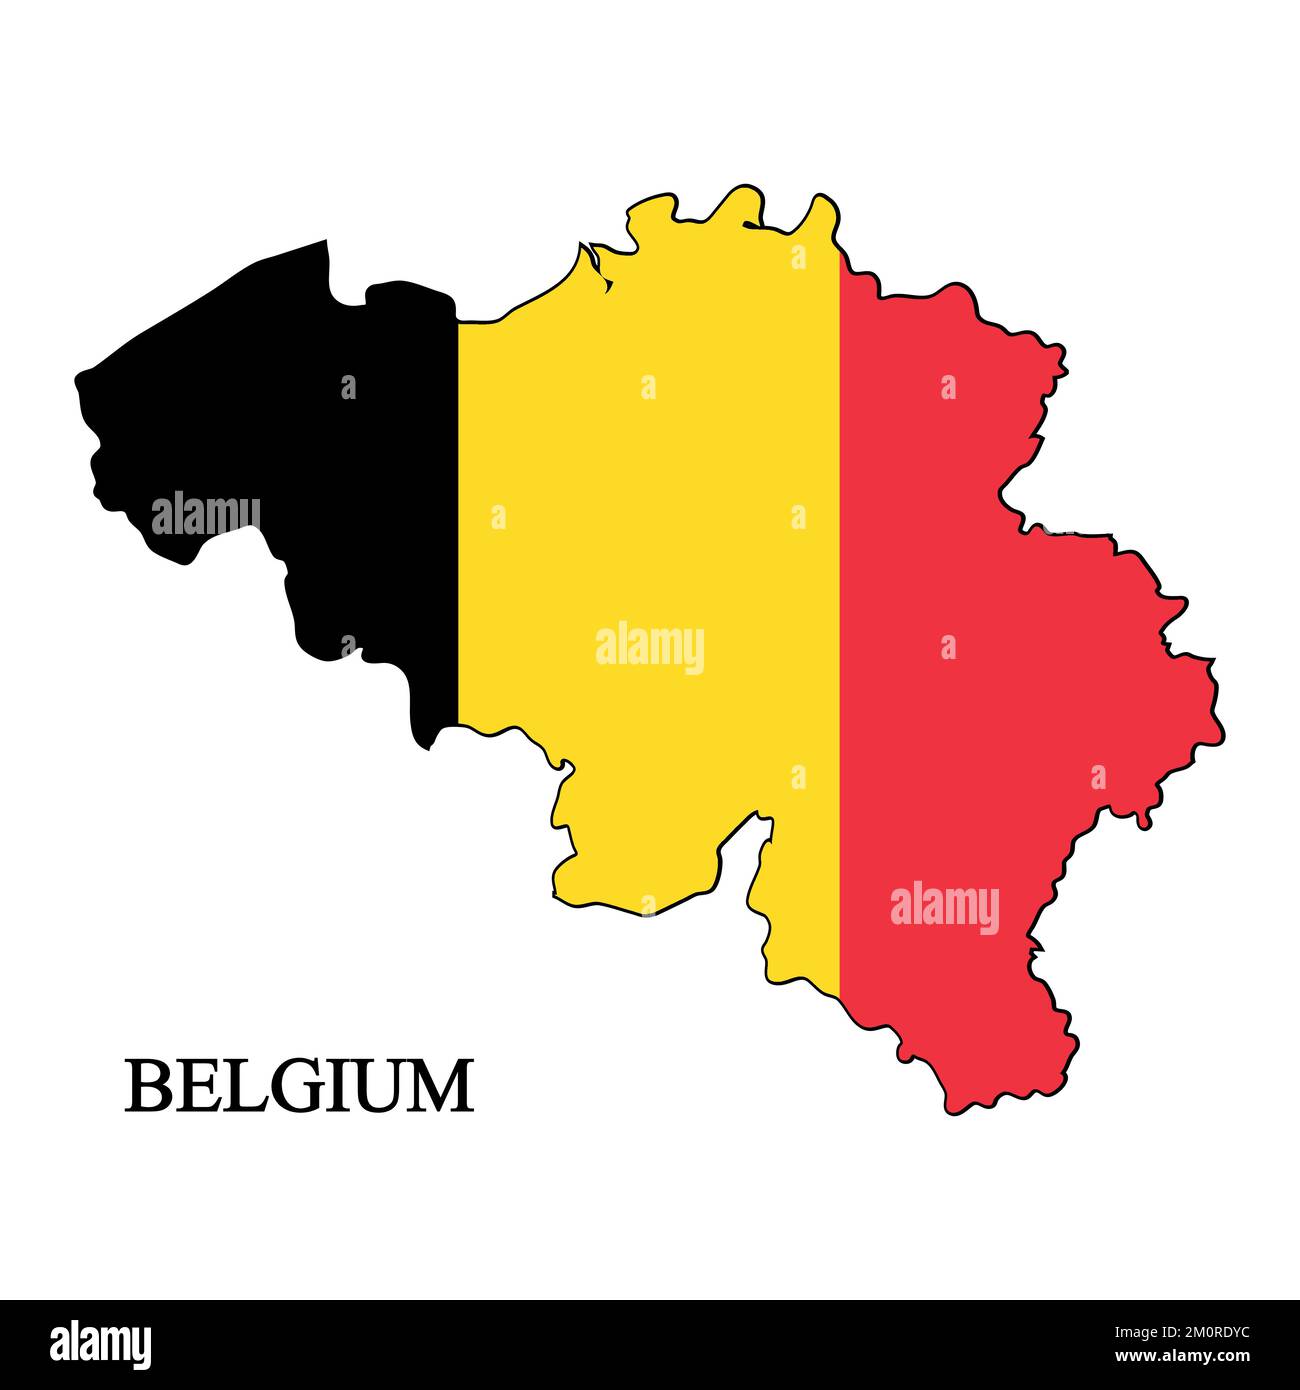 Belgium map vector illustration. Global economy. Famous country. Western Europe. Europe. Stock Vector